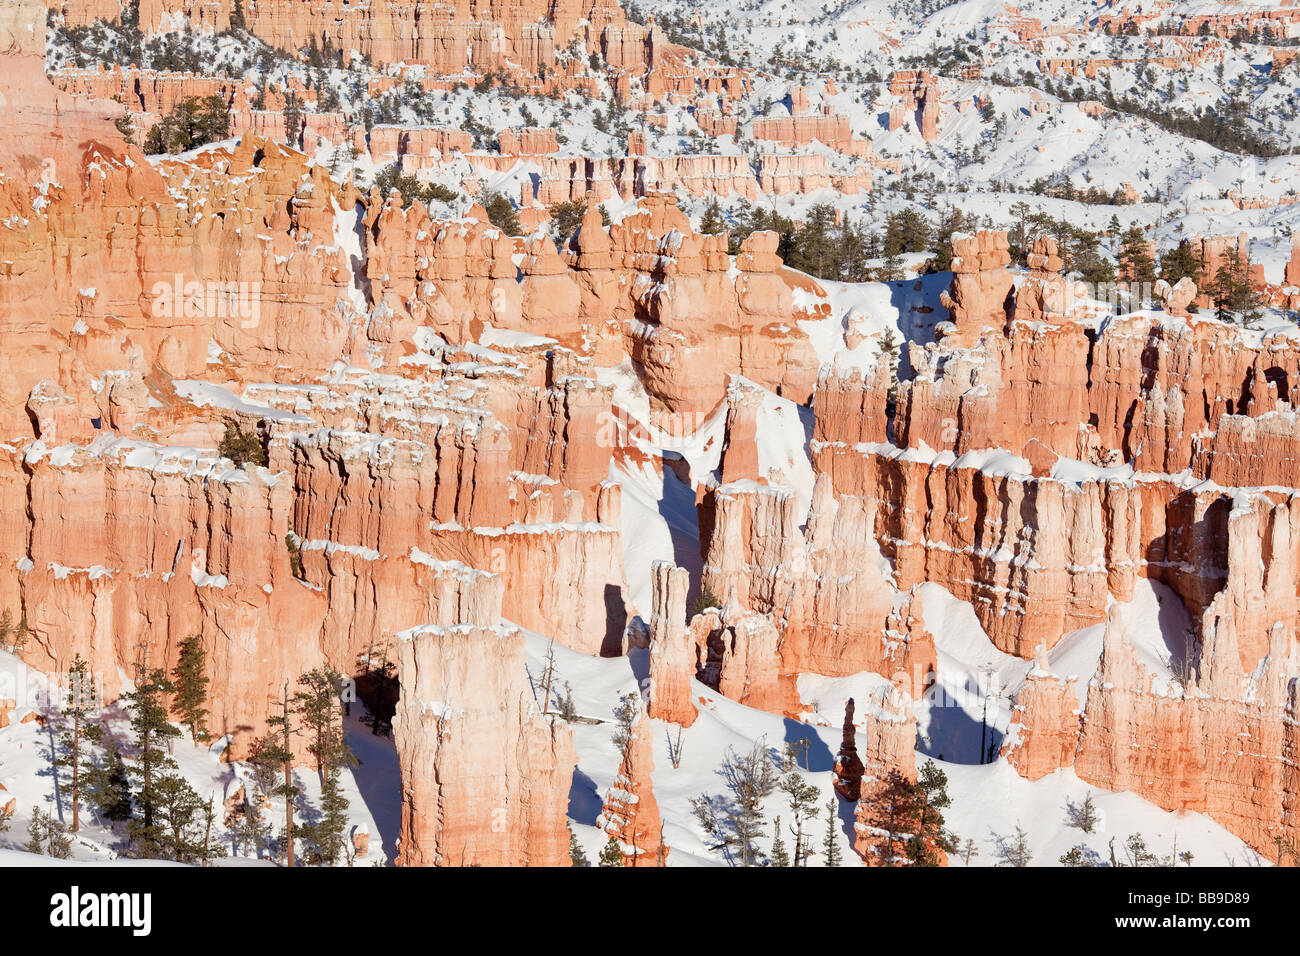 Bryce Canyon National Park in Winter Snow, Garfield County